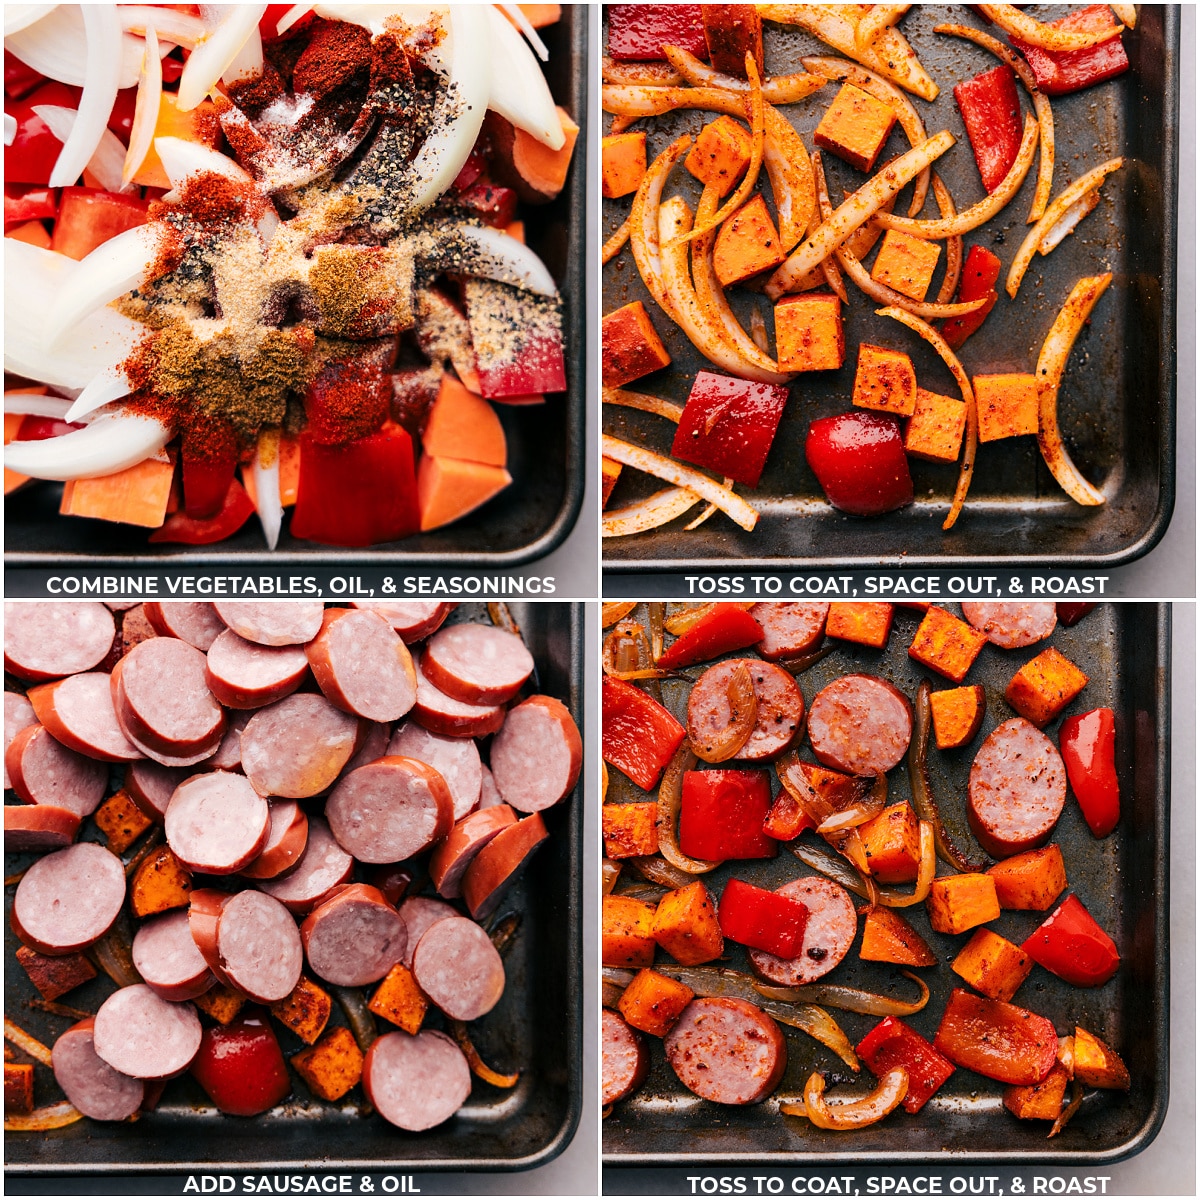 Ingredients for a one-pan Sweet Potato and Sausage dish combined on a baking tray, featuring sliced sausage, cubed sweet potatoes, drizzled with oil, and sprinkled with seasonings, ready to be roasted.